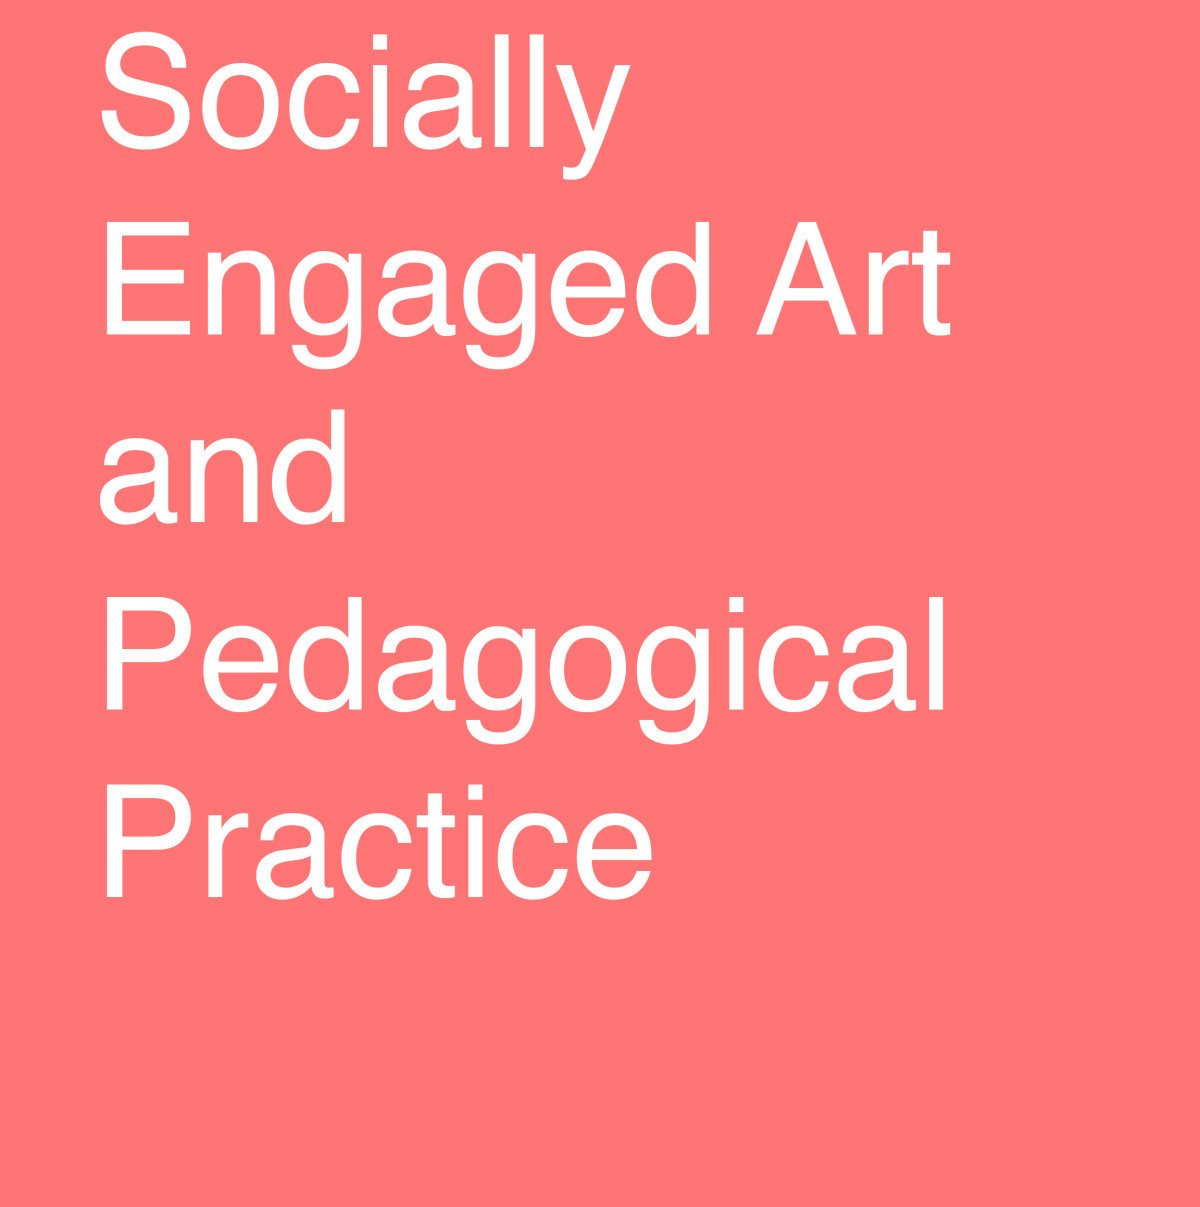 Socially Engaged Art and Pedagogical Practice- Parameters, Practices and Policies in the Formation of Teachers, Artists and Educators